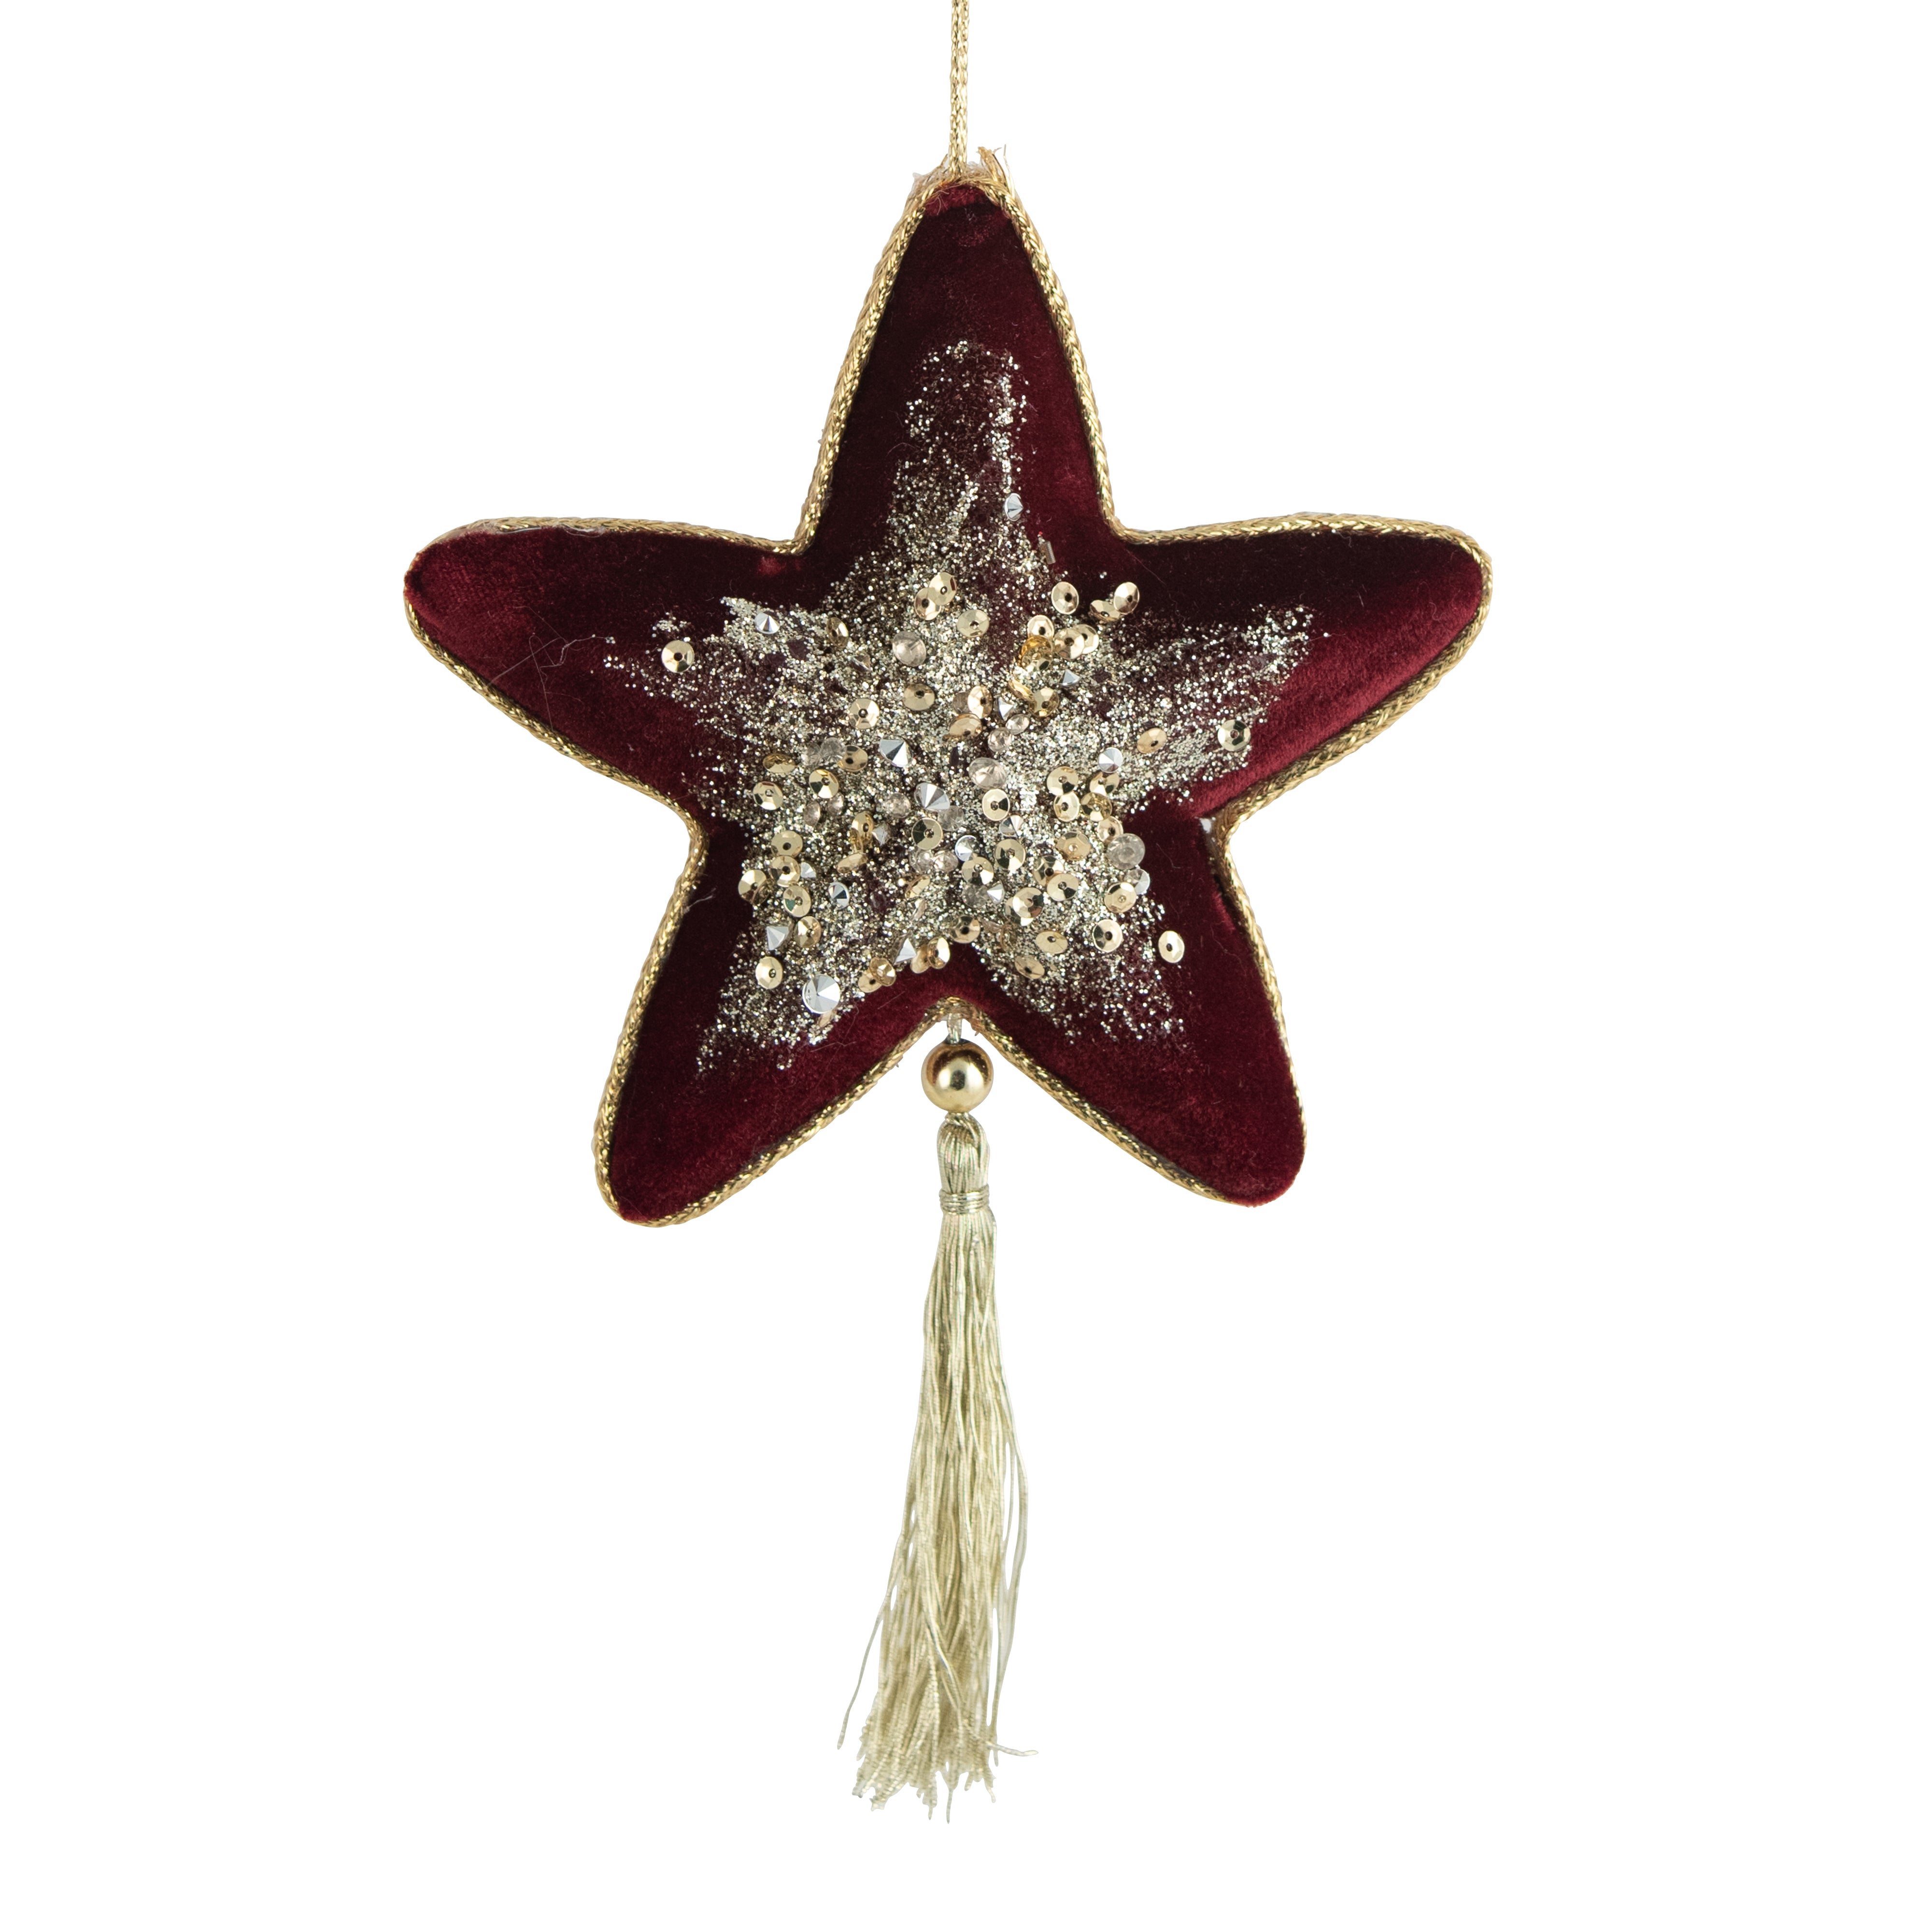 Fabric Burgundy and Gold Star Ornament